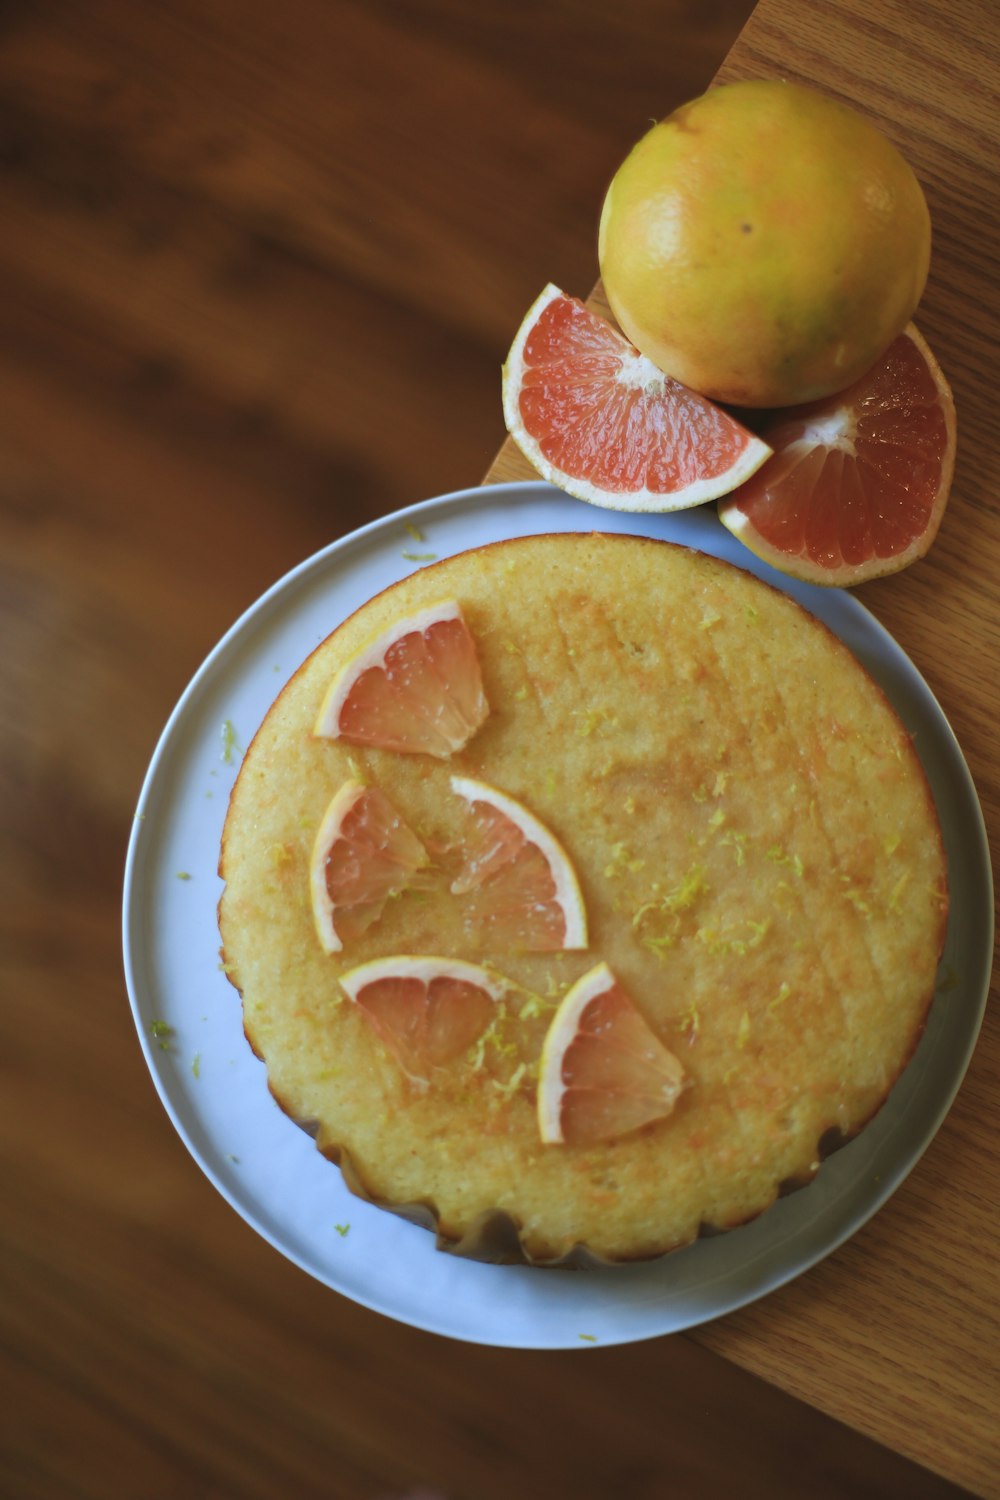 a cake on a plate with oranges and a grapefruit